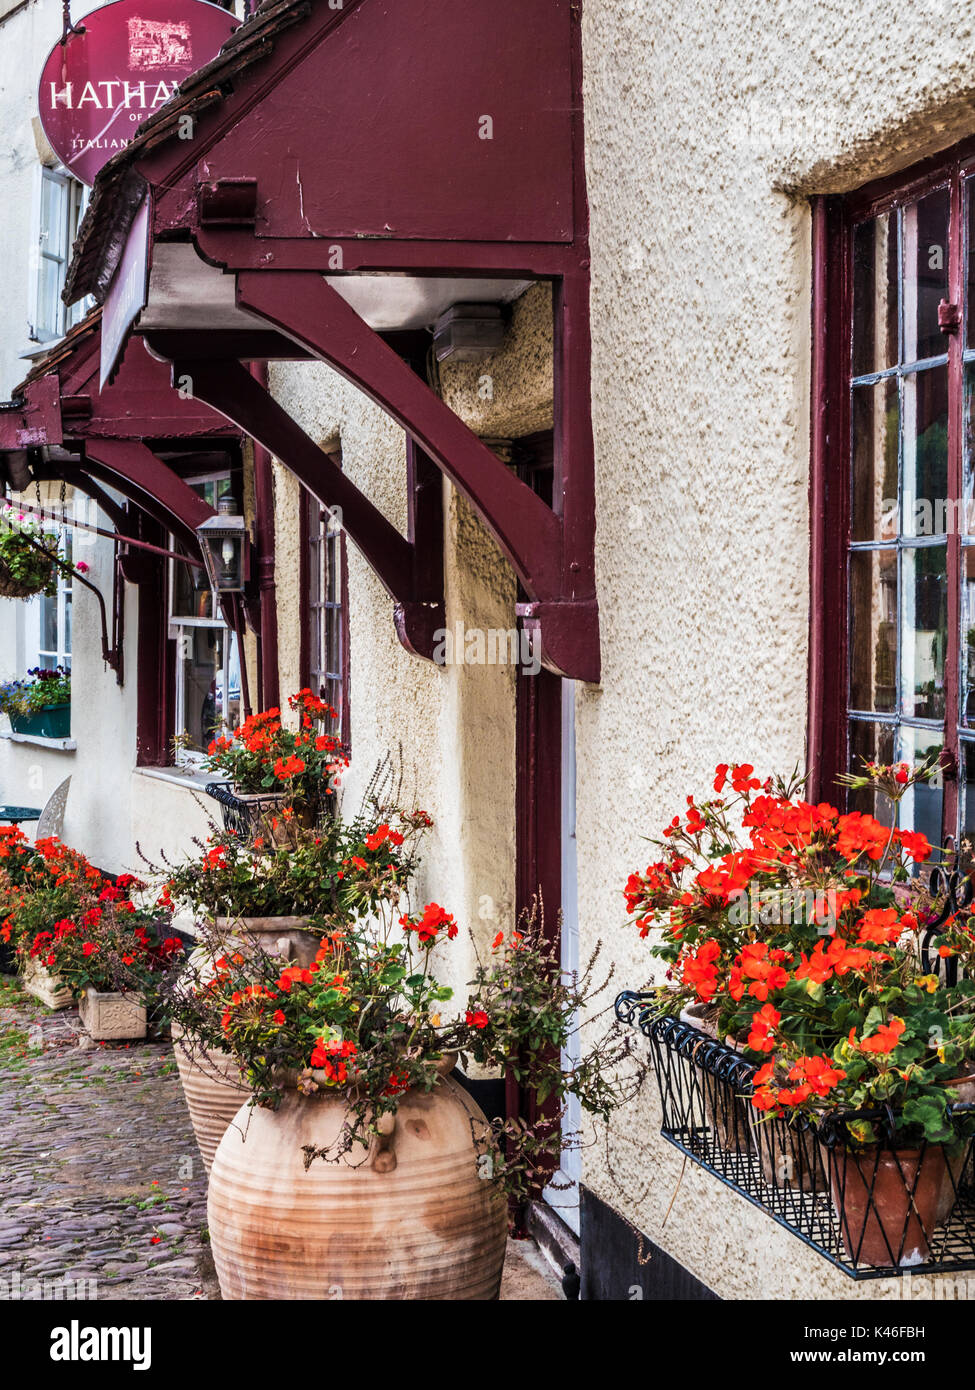 A hisoric old house, now an Italian restaurant, in Dunster near Minehead, Somerset. Stock Photo